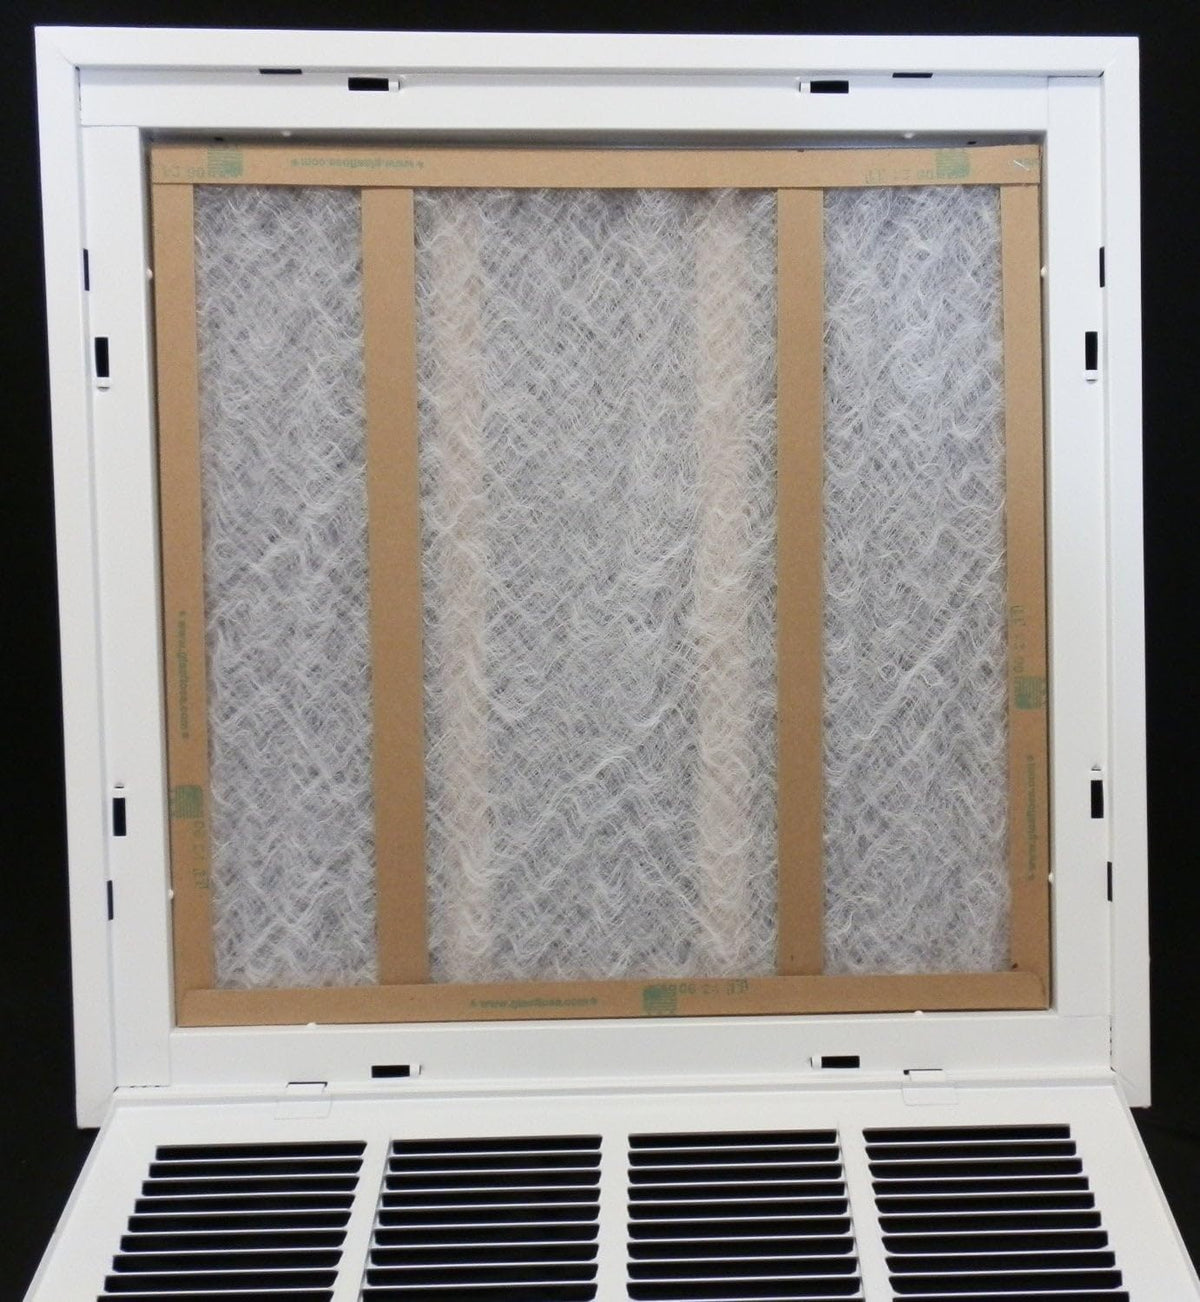 18&quot; X 10&quot; Steel Return Air Filter Grille for 1&quot; Filter - Fixed Hinged - [Outer Dimensions: 20 5/8&quot; X 12 5/8&quot;]